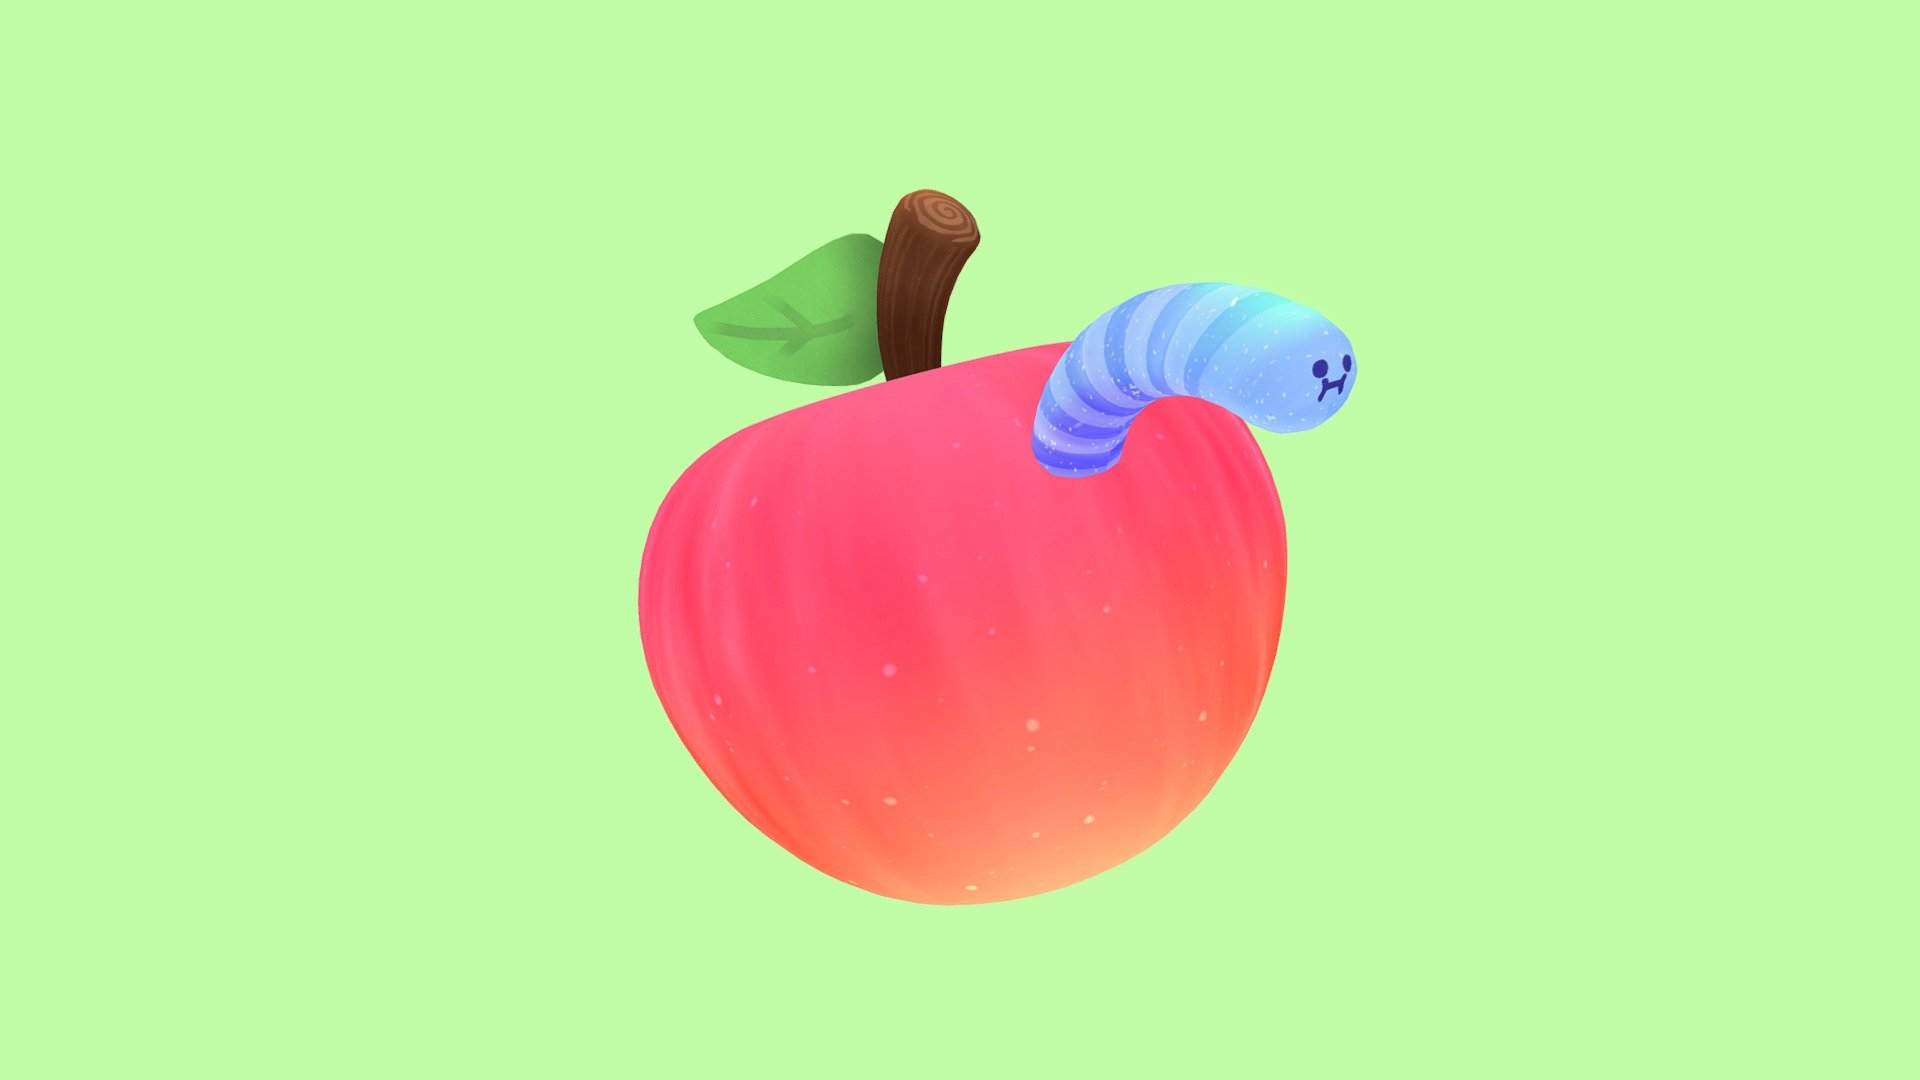 THERE IS A WORM IN YOUR APPLE! Just kidding, it's just a gummy worm, haha got youuuuuuuu

Made for the sketchfab weekly challenge! - Apple & Gummy Worm - 3D model by icebell (@icedbell) 3d model